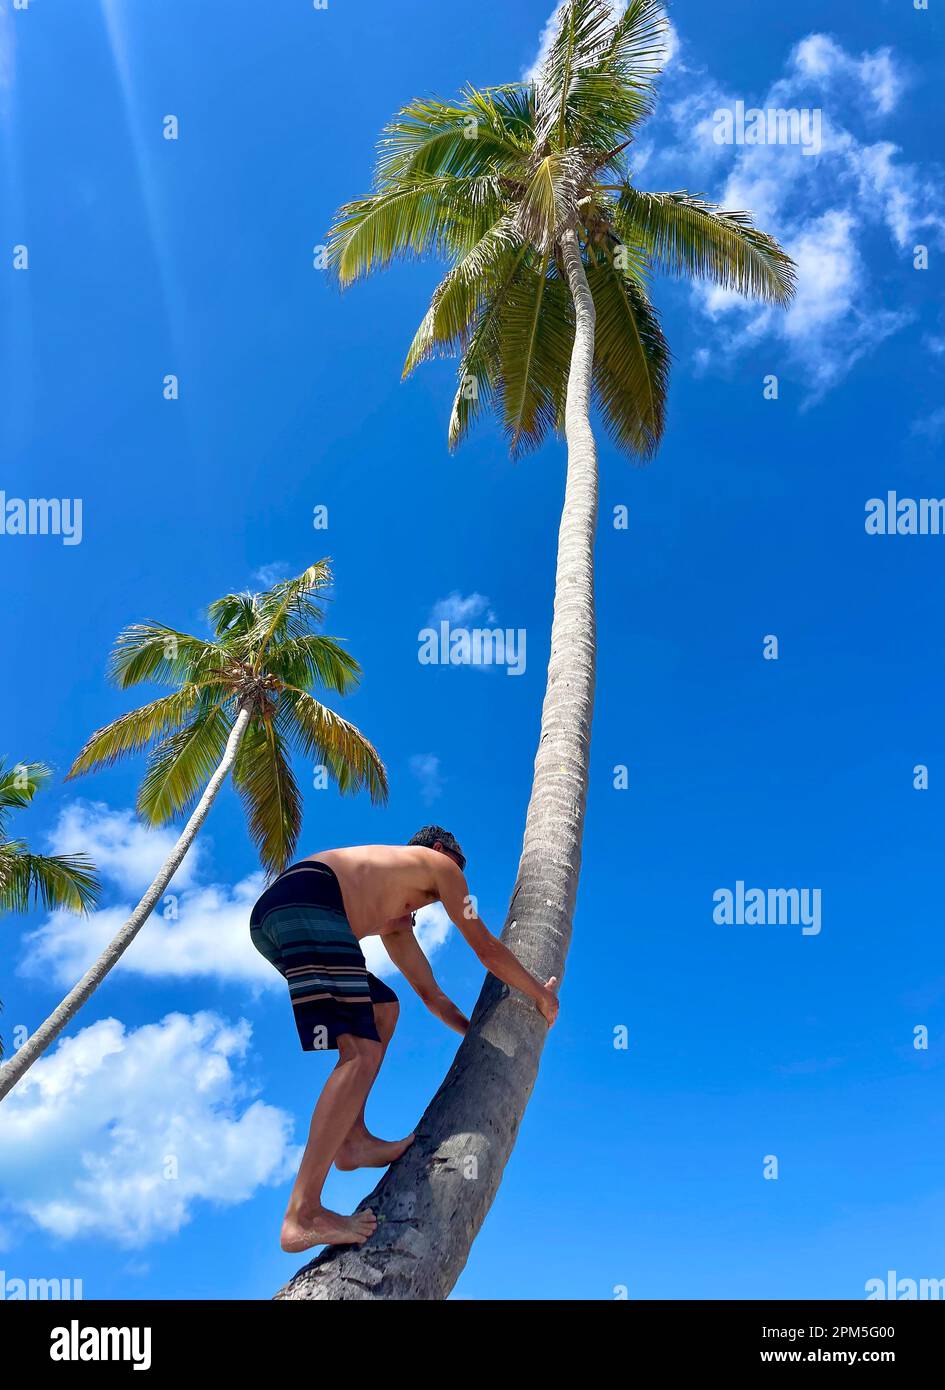 View from below of man climbing palm tree Stock Photo